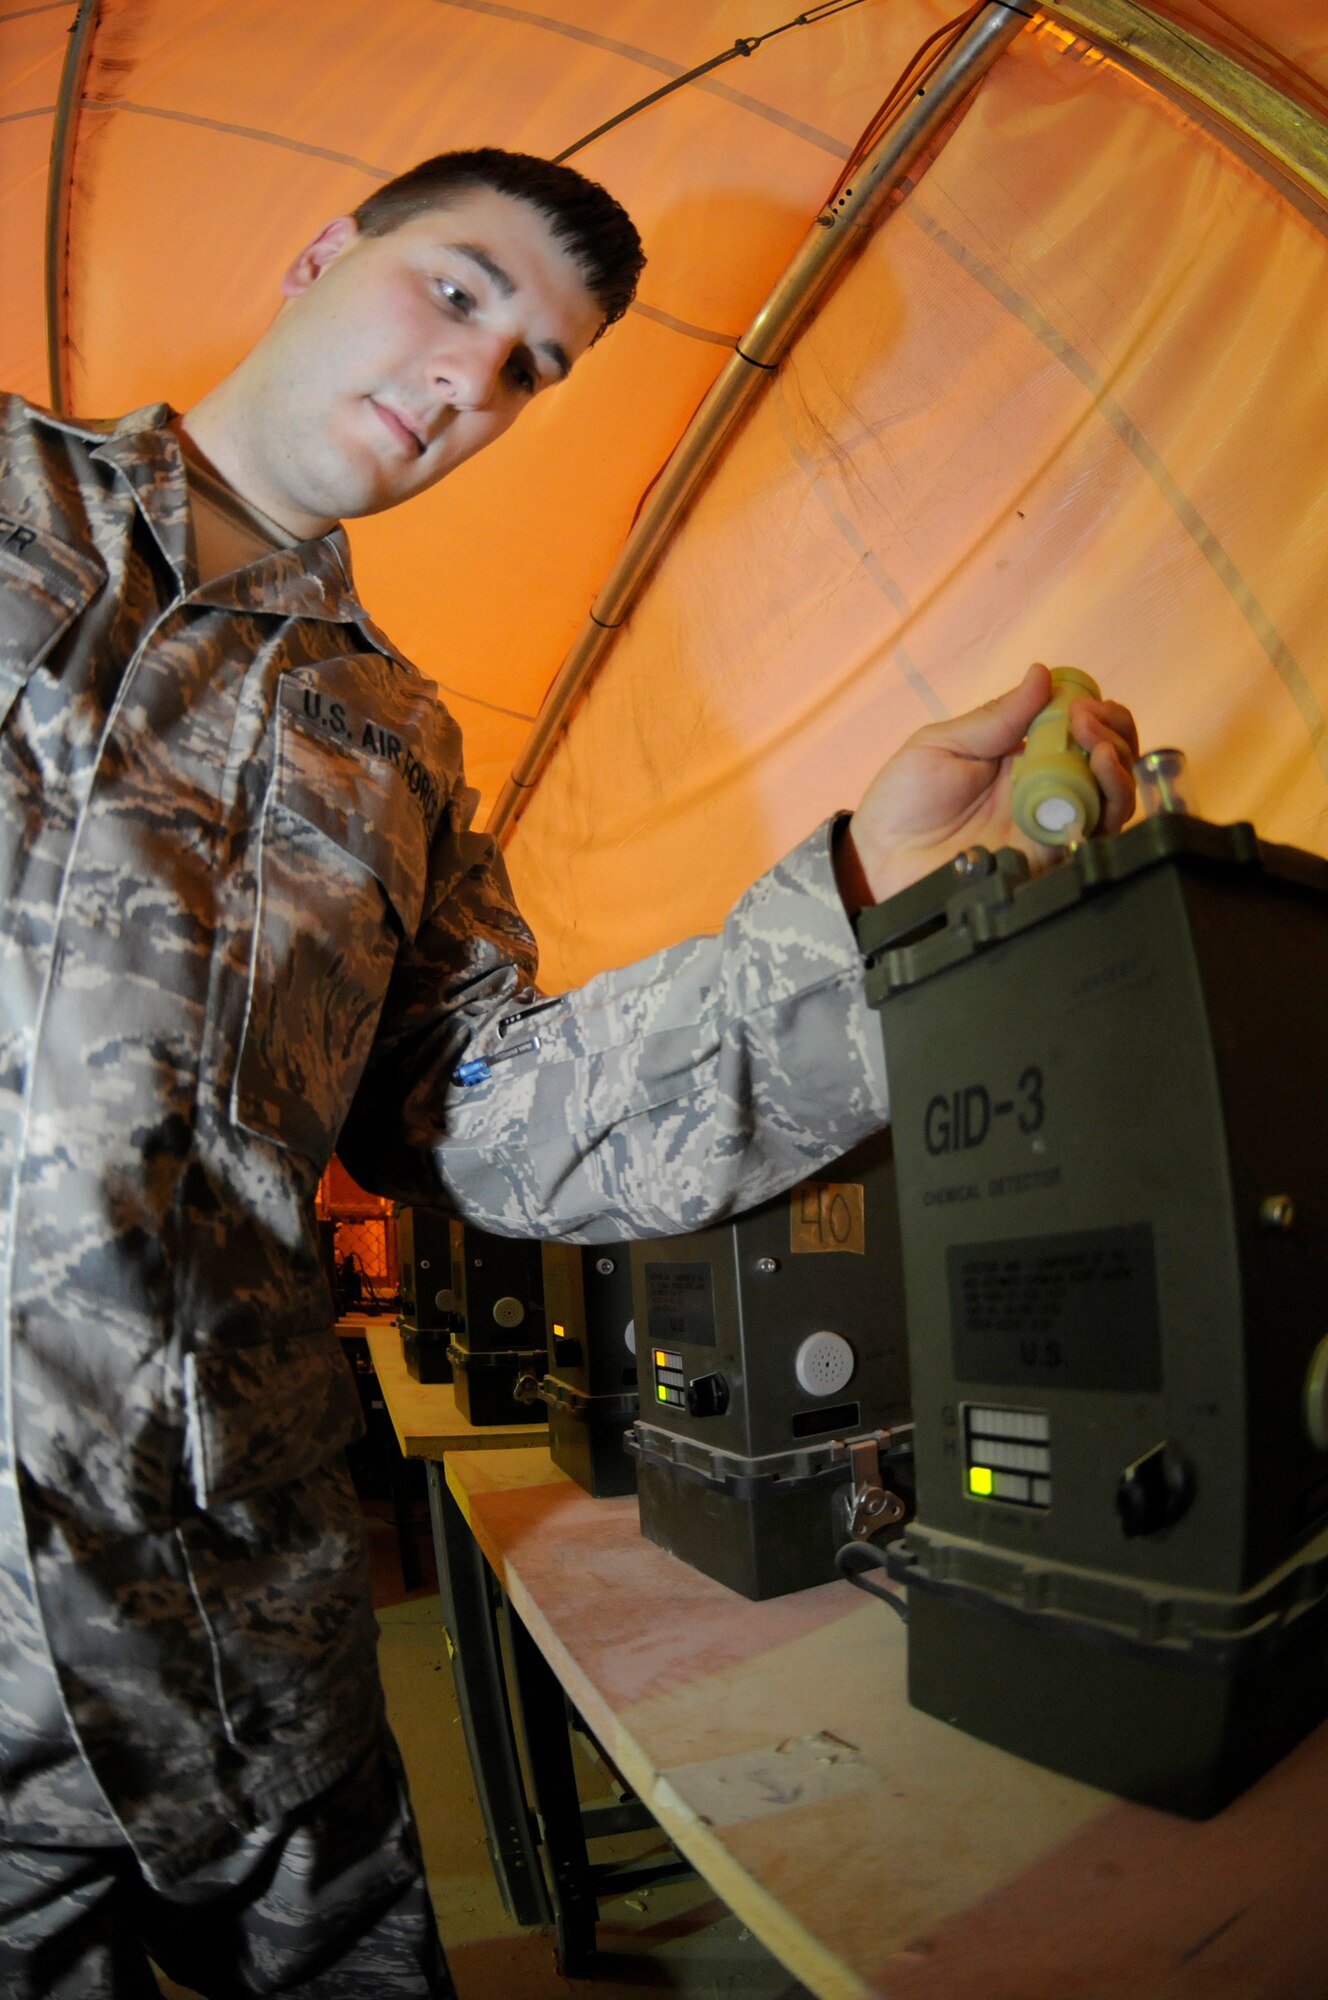 Airman 1st Class James Baker, emergency management journeyman assigned to the 379th Expeditionary Civil Engineer Squadron, uses a stimulant to do an operational check on M-22 chemical detectors Oct. 1, 2008, at an undisclosed air base in Southwest Asia. Emergency management members ensure equipment and personnel are prepared should the enemy choose to resort to chemical weapons use. Airman Baker, a native of Stafford, Va., is deployed from Yokota Air Base, Japan, in support of Operations Iraqi and Enduring Freedom and Joint Task Force-Horn of Africa. (U.S. Air Force photo by Staff Sgt. Darnell T. Cannady/Released)